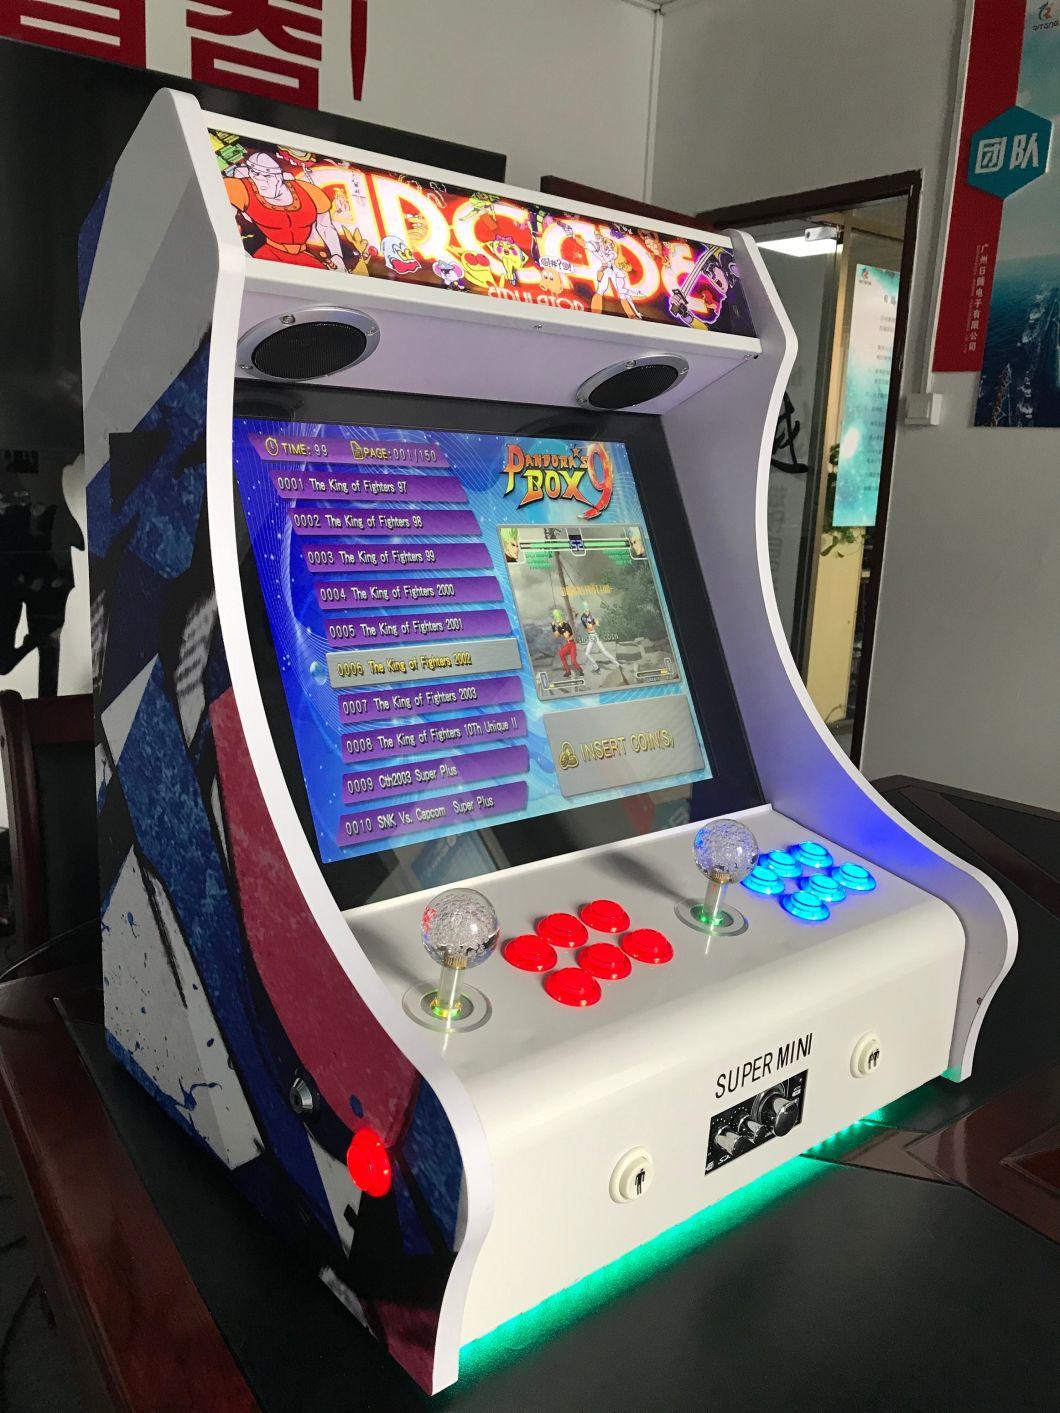 Arcade Bartop Console Cabinet Fighting Game Machine Arcade with 1500 in 1 Games Arcade Video Old PAC Man Arcade Game